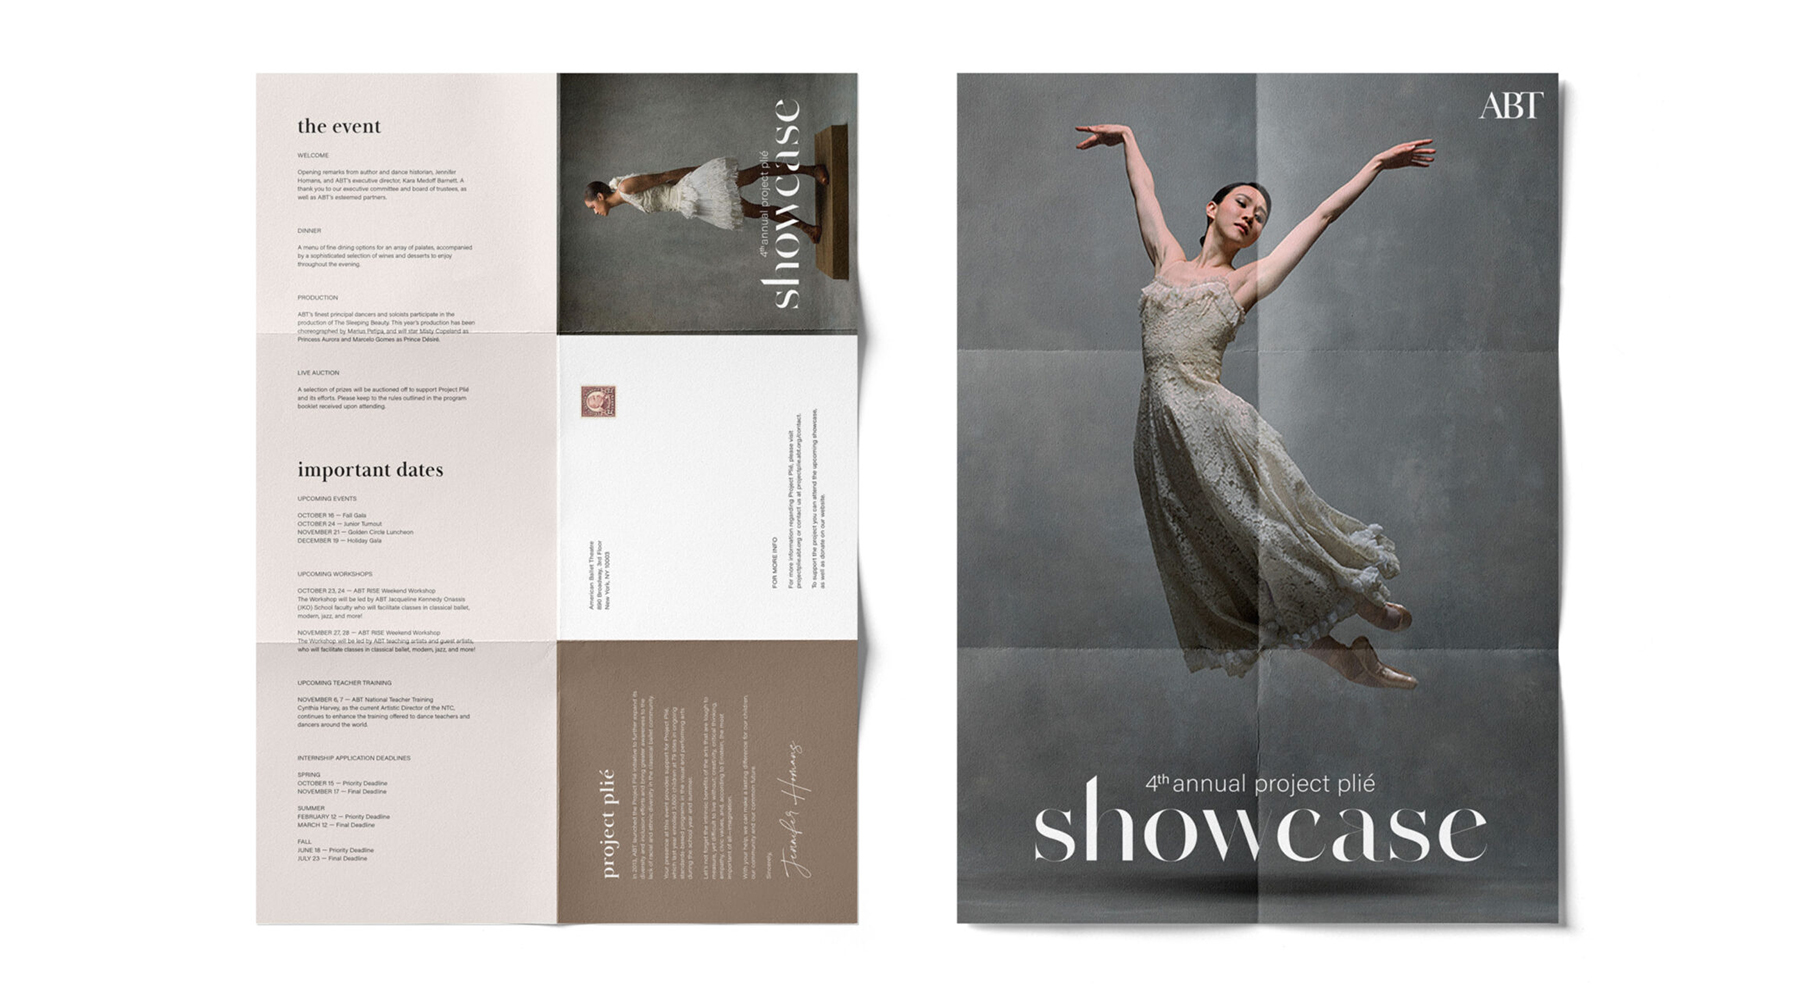 A wallpaper and a flyer with a ballerina performing. The text on the poster: showcase.